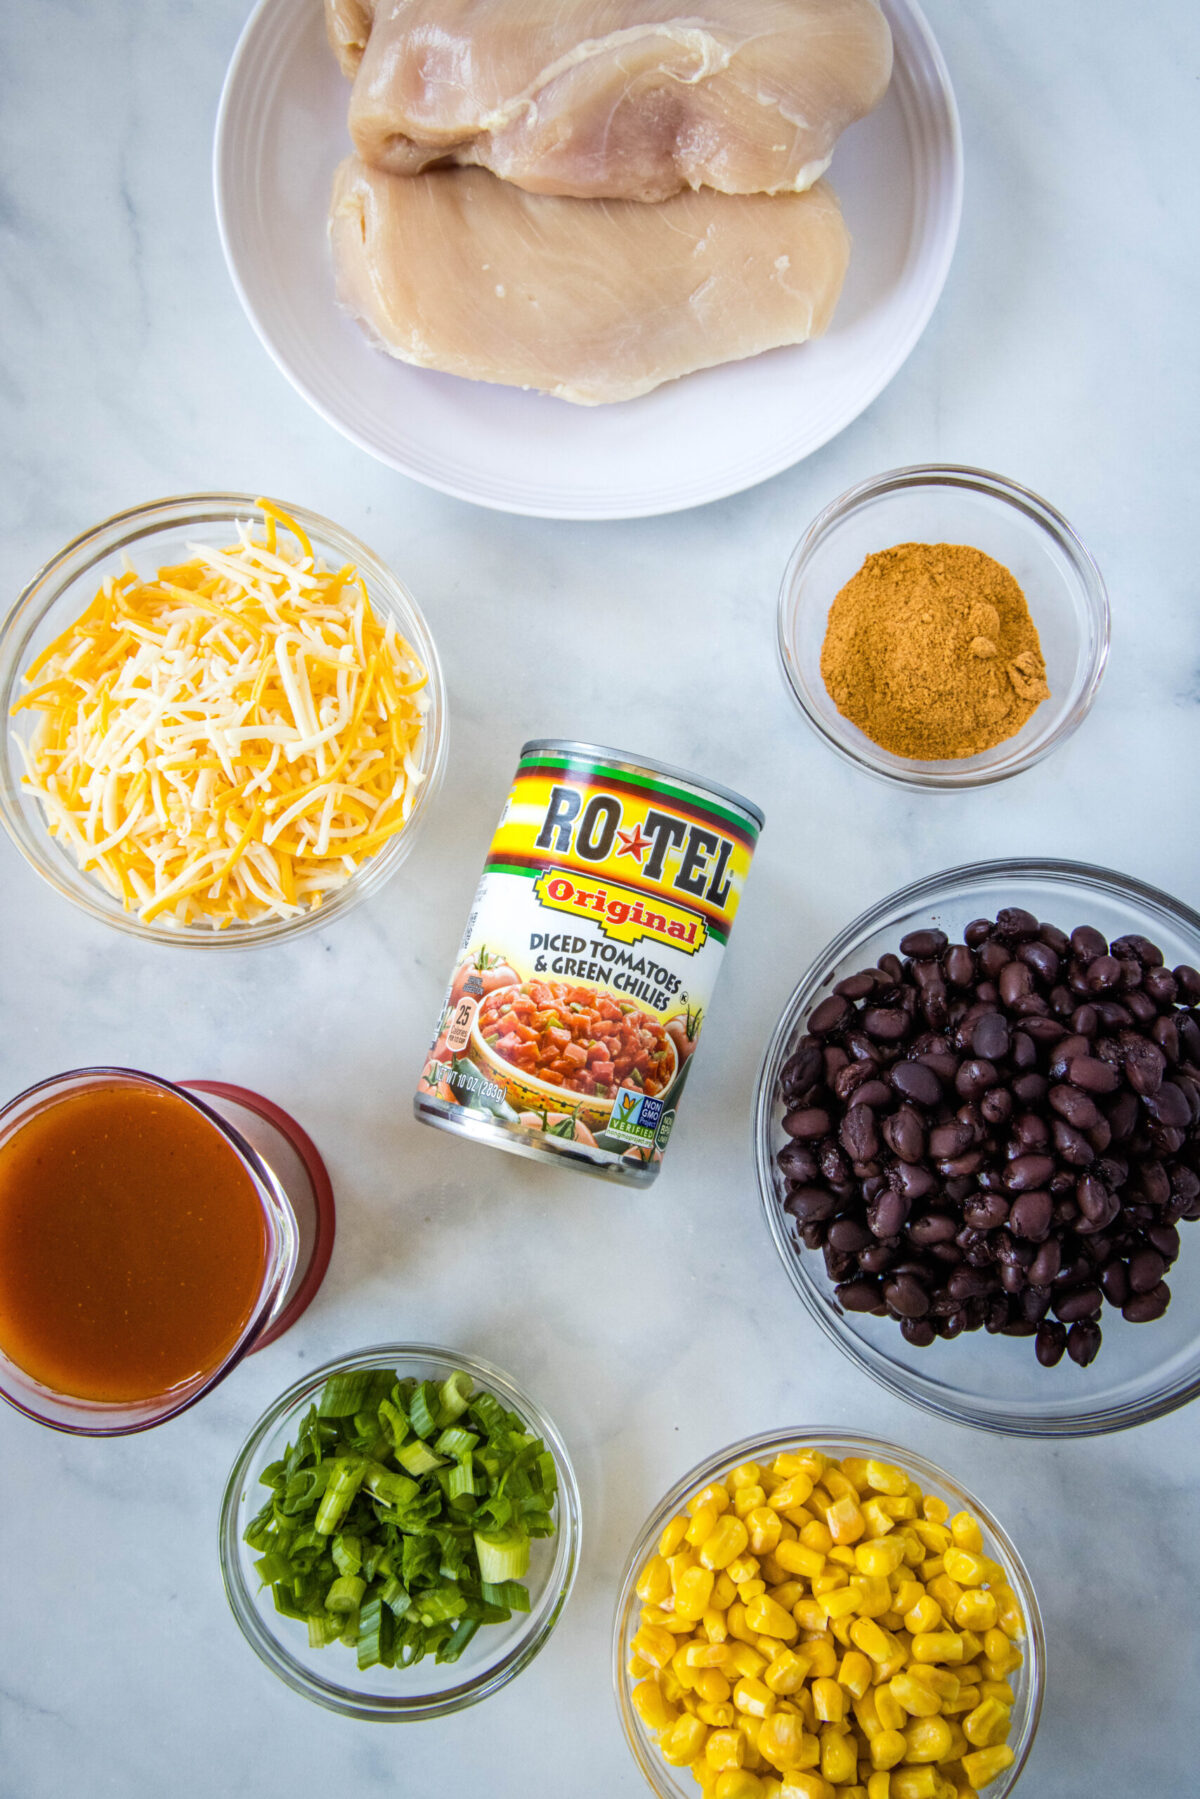 Overhead view of the ingredients needed for crock pot Santa Fe chicken: a plate of chicken breasts, a bowl of shredded cheese, a bowl of black beans, a can of tomatoes with chilies, a bowl of taco seasoning, a jar of enchilada sauce, a bowl of corn, and a bowl of green onions